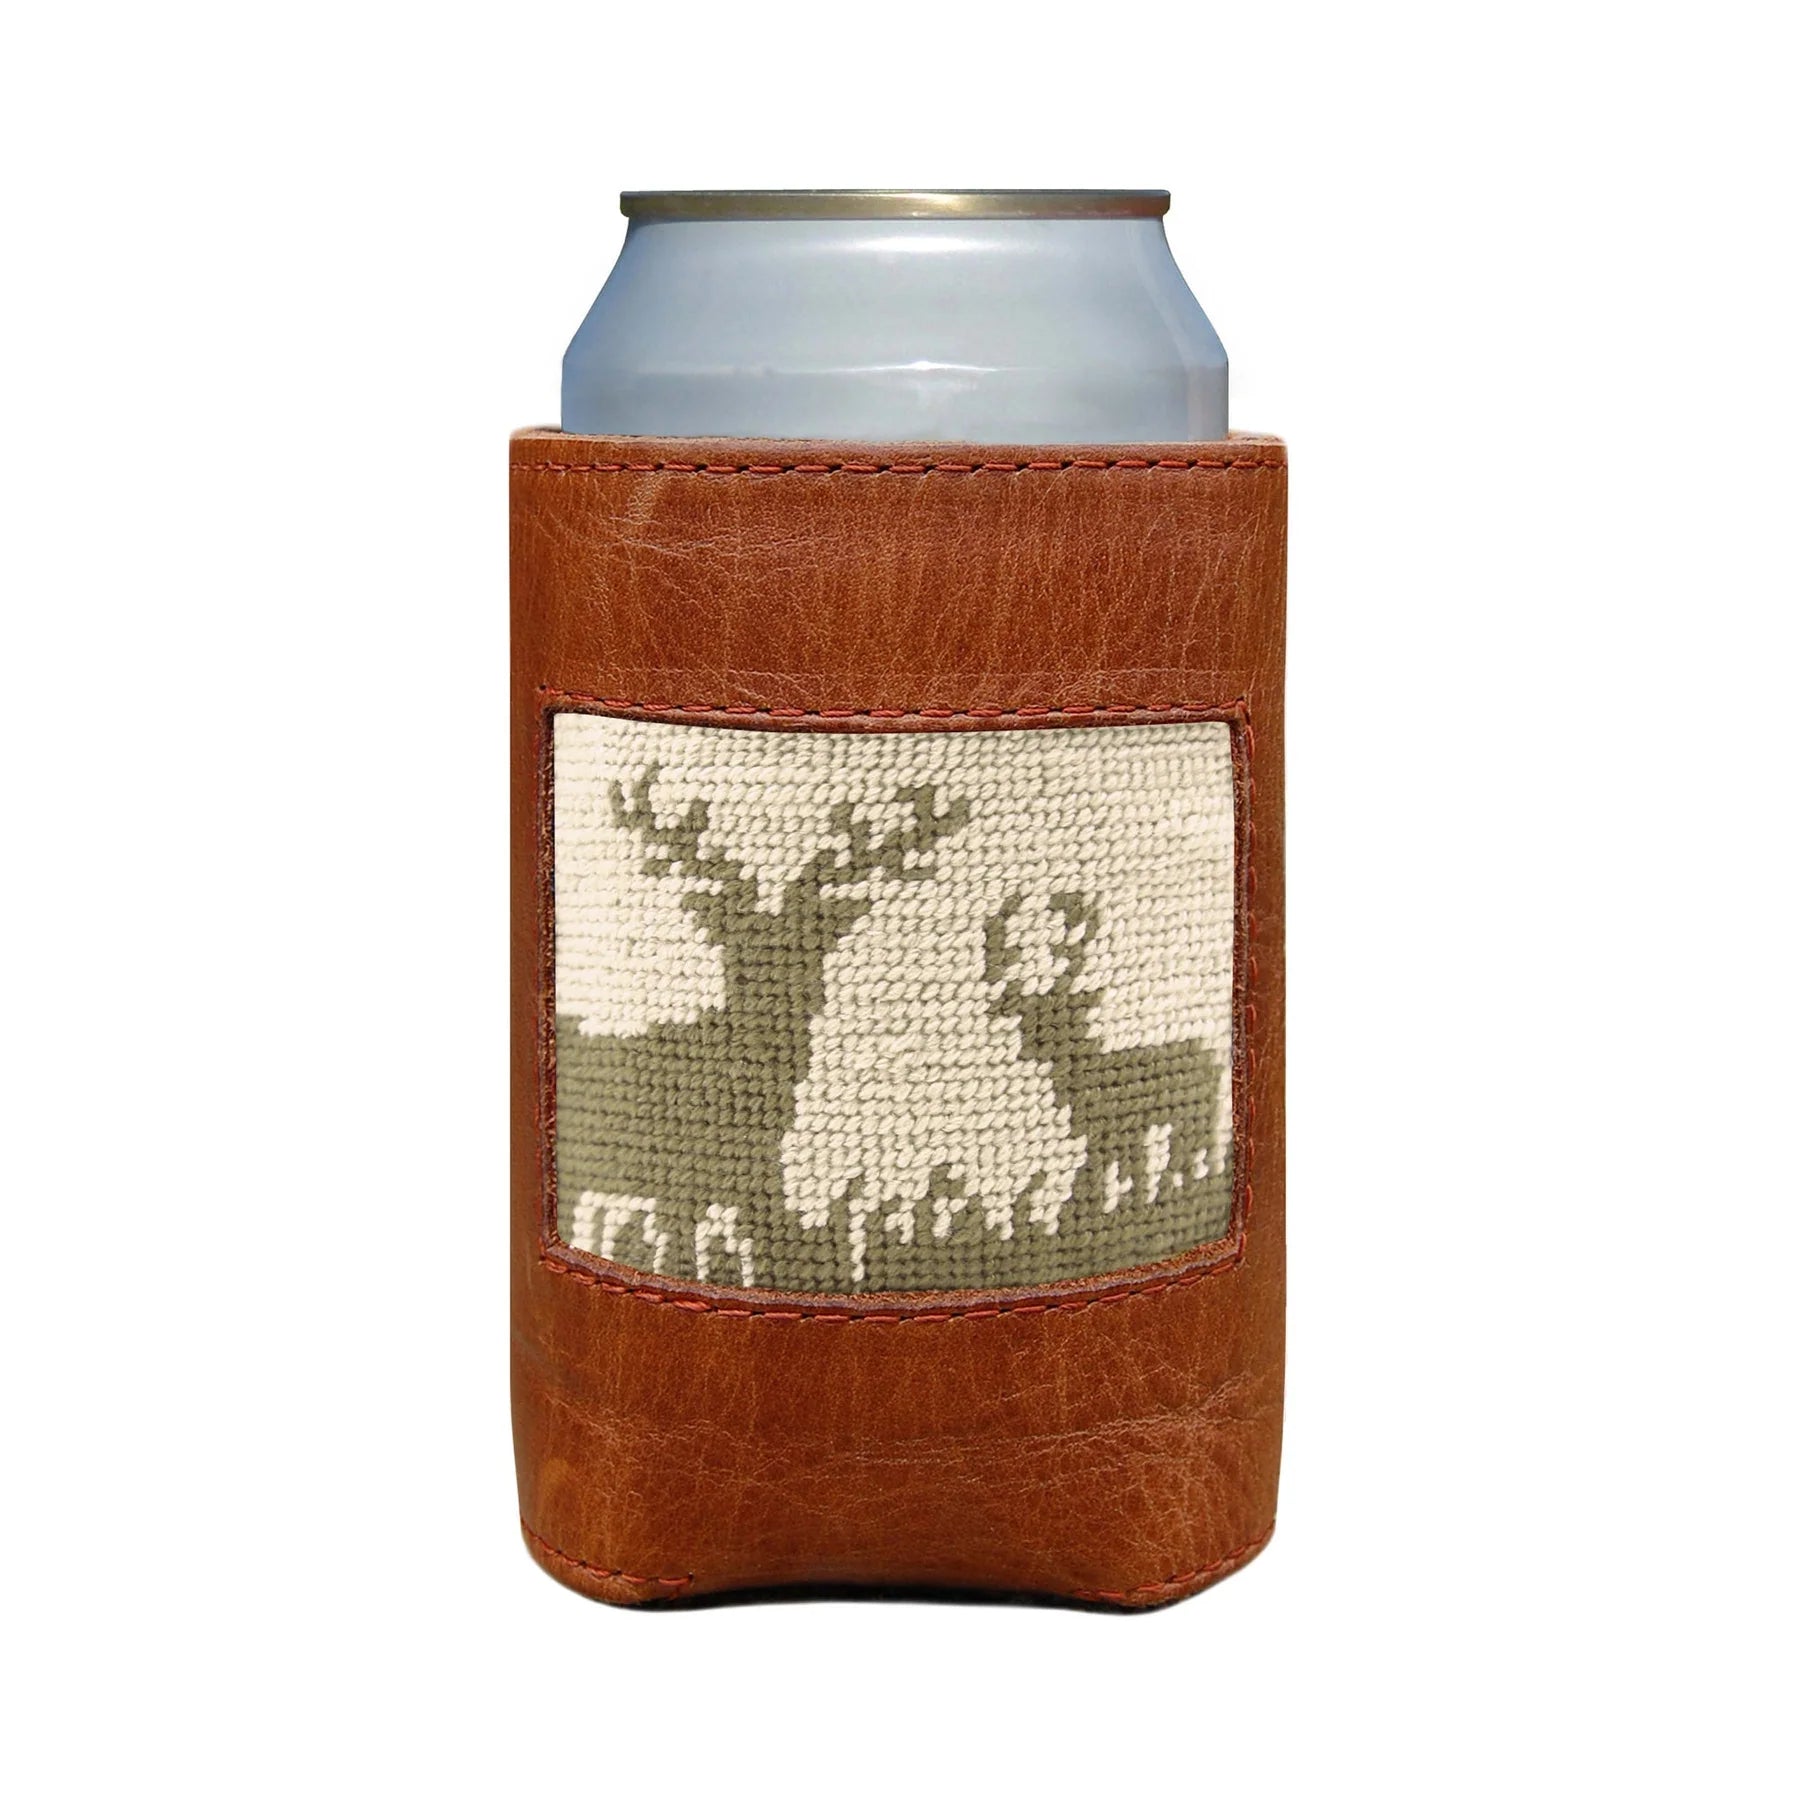 Oiled Can Coozie with Needlepoint Face